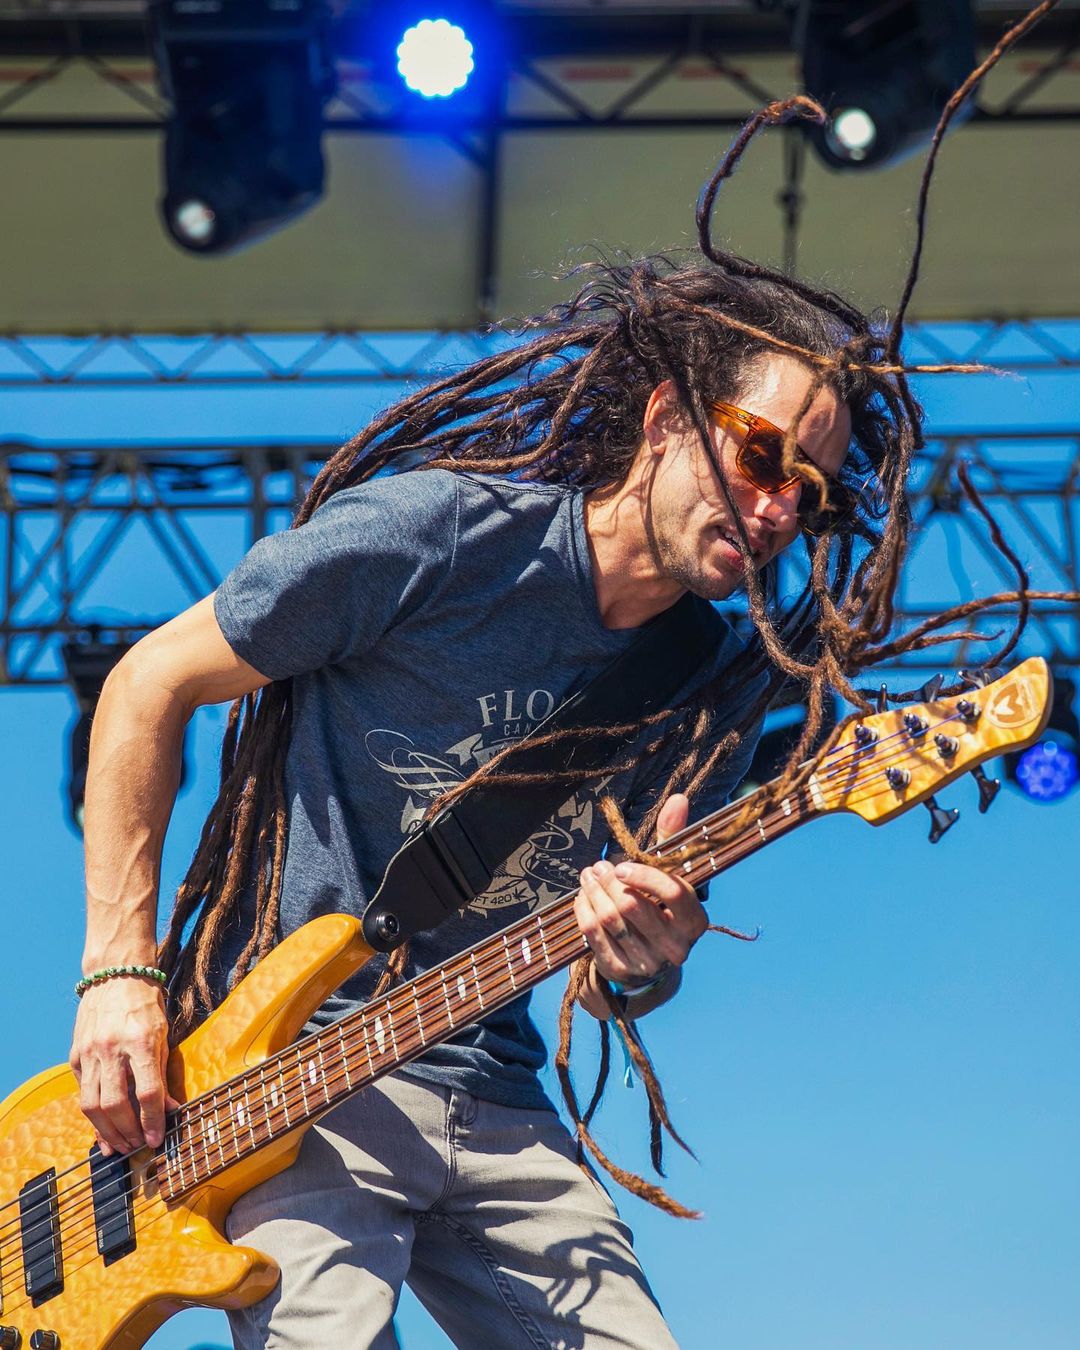 Guitar Player Performing at Florida's Reggae Rise Up. Photo by Instagram user @stpetefl